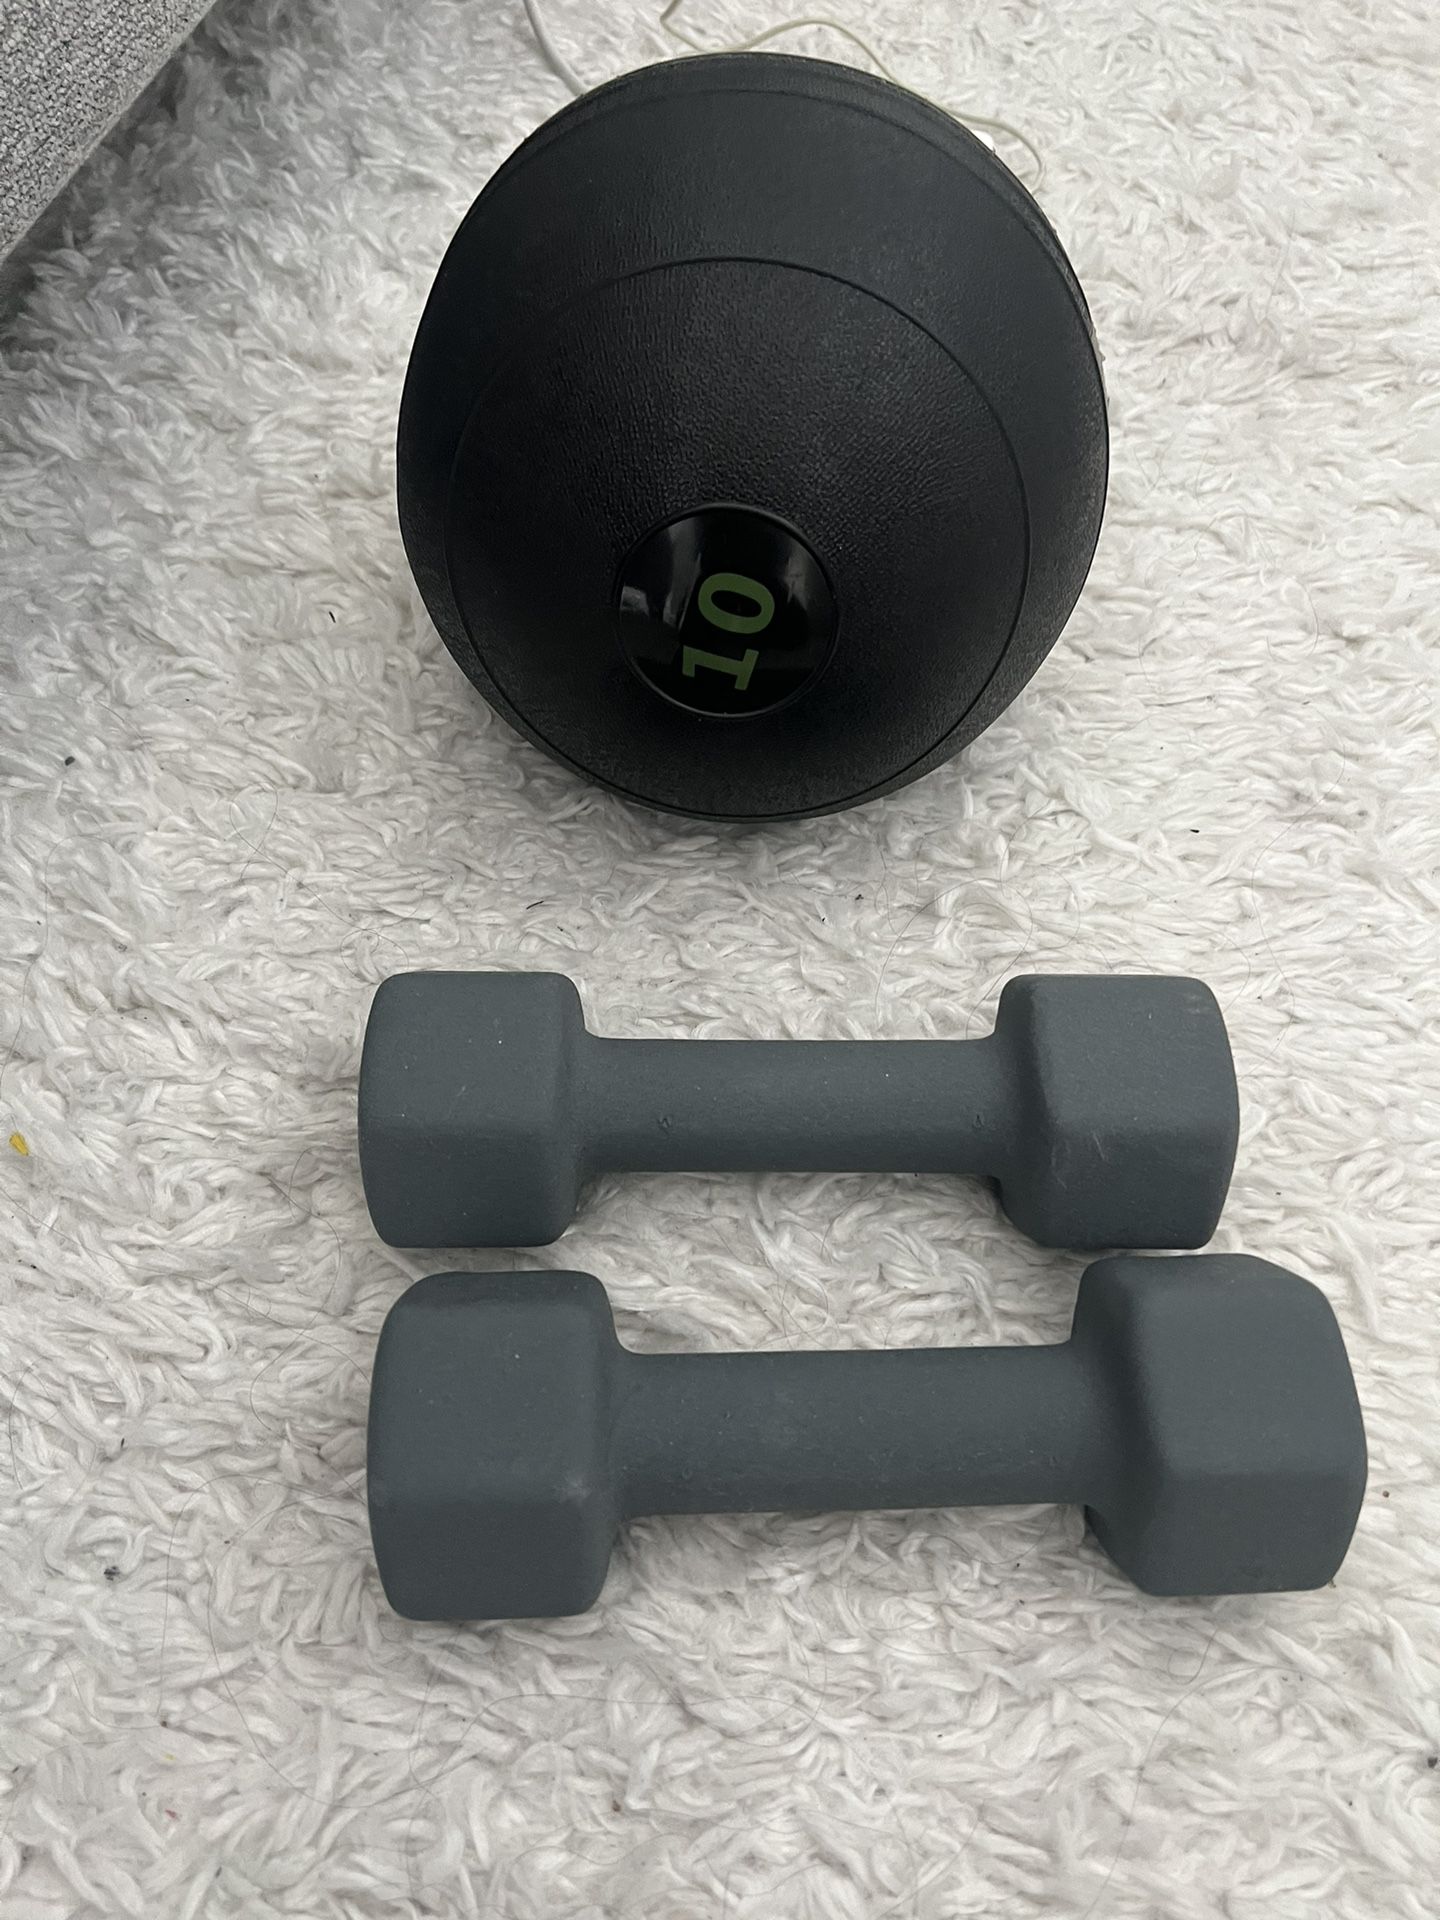 8 Ibs Dumbbell And 10 Pound Medicine Ball